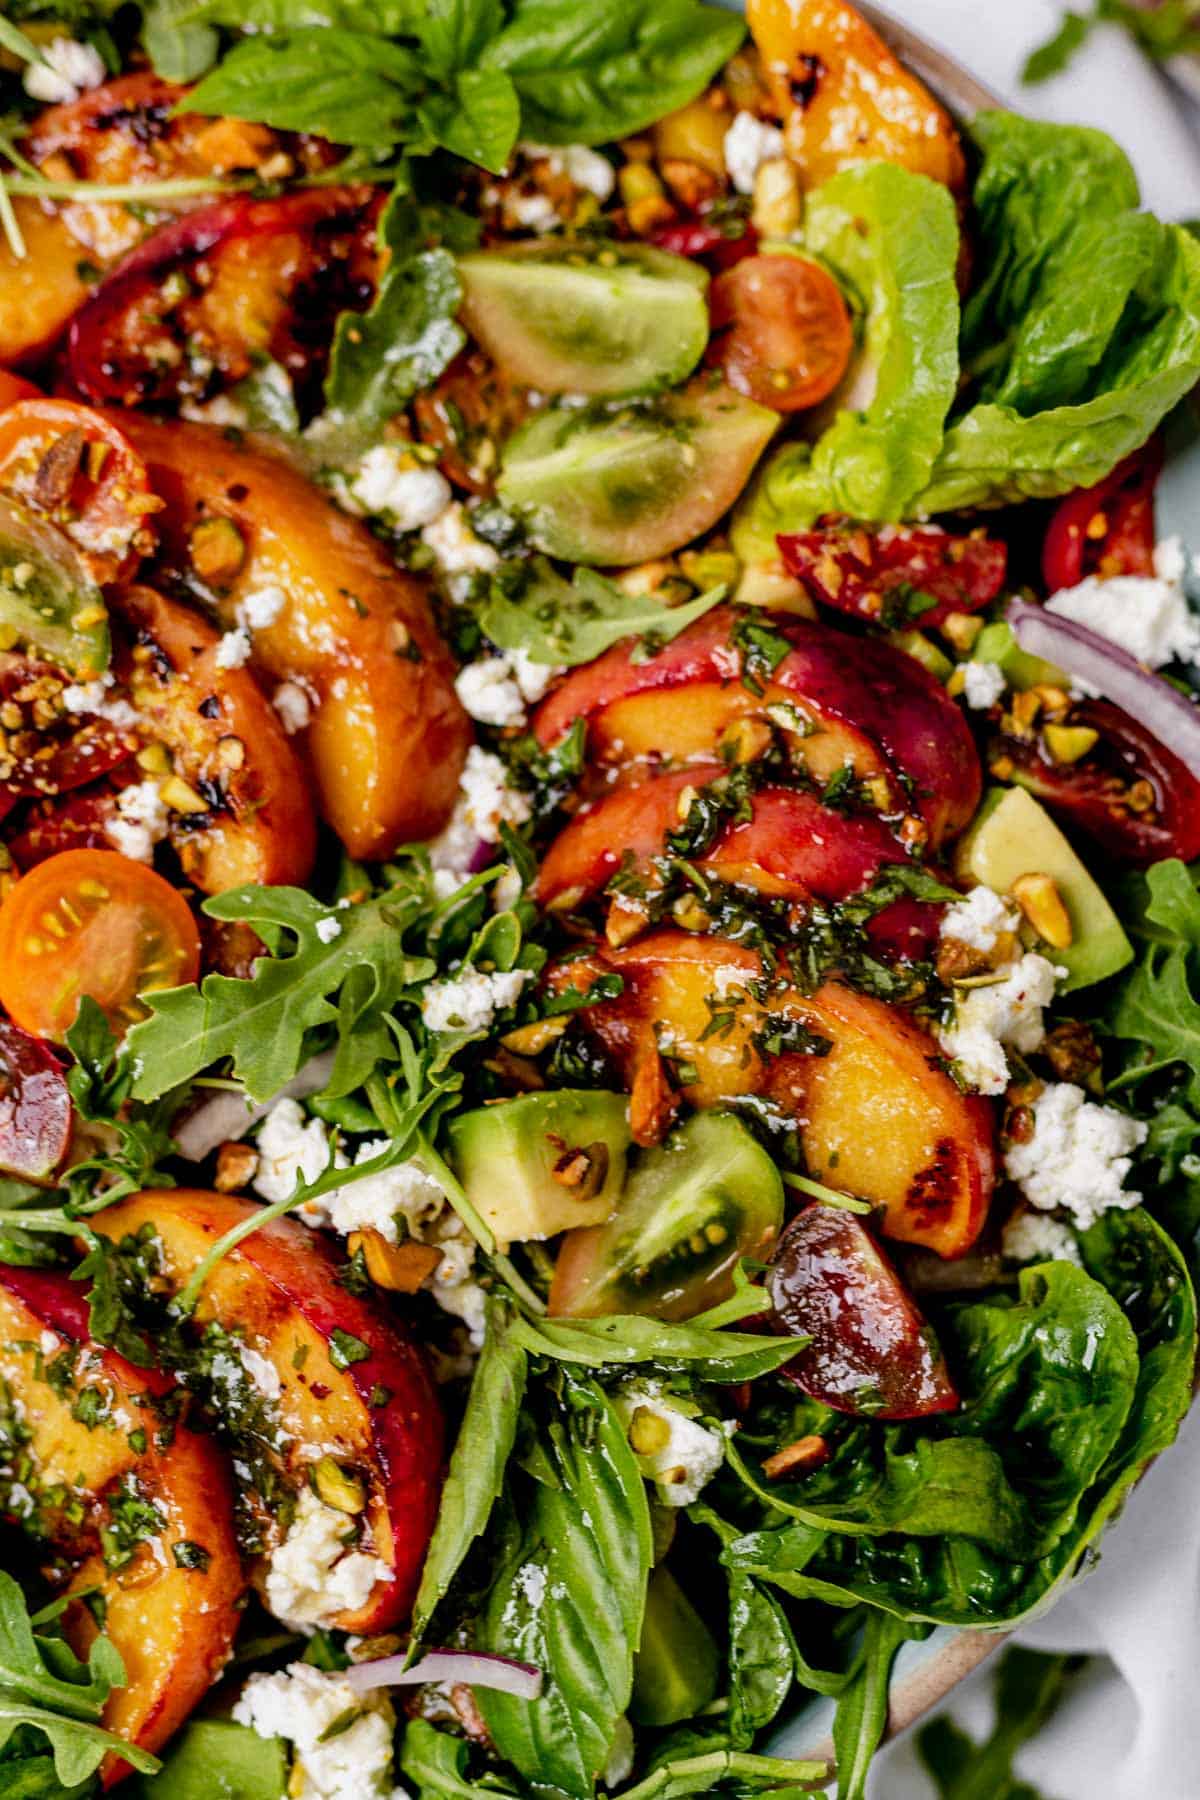 grilled peaches on top of mixed greens with tomatoes, goat cheese and basil